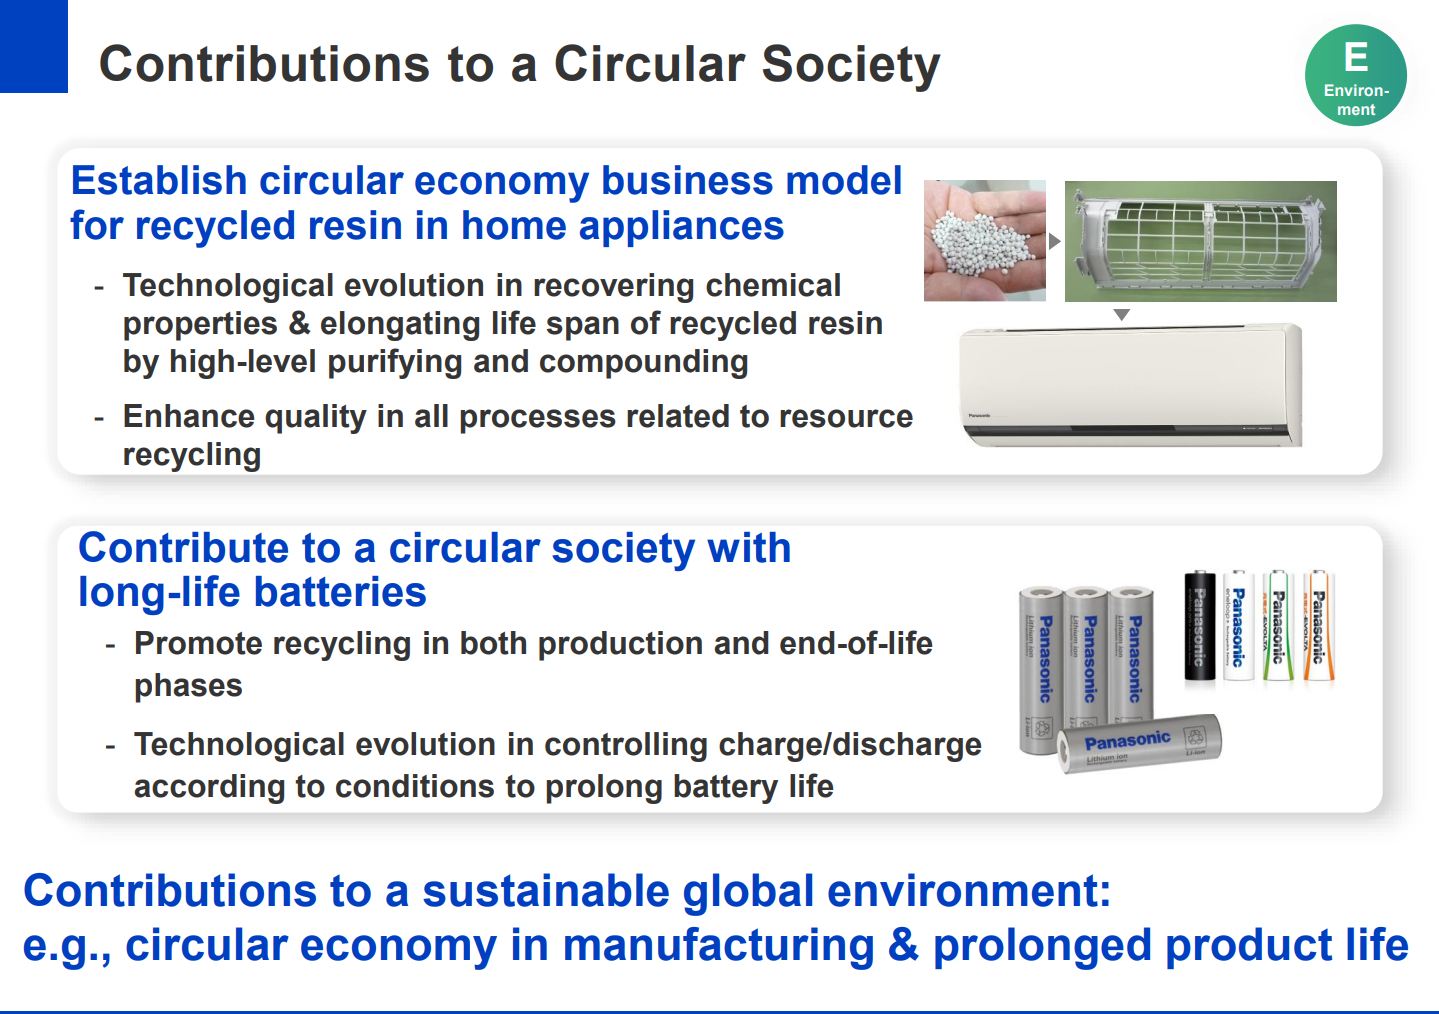 Figure: Contributions to a circular society